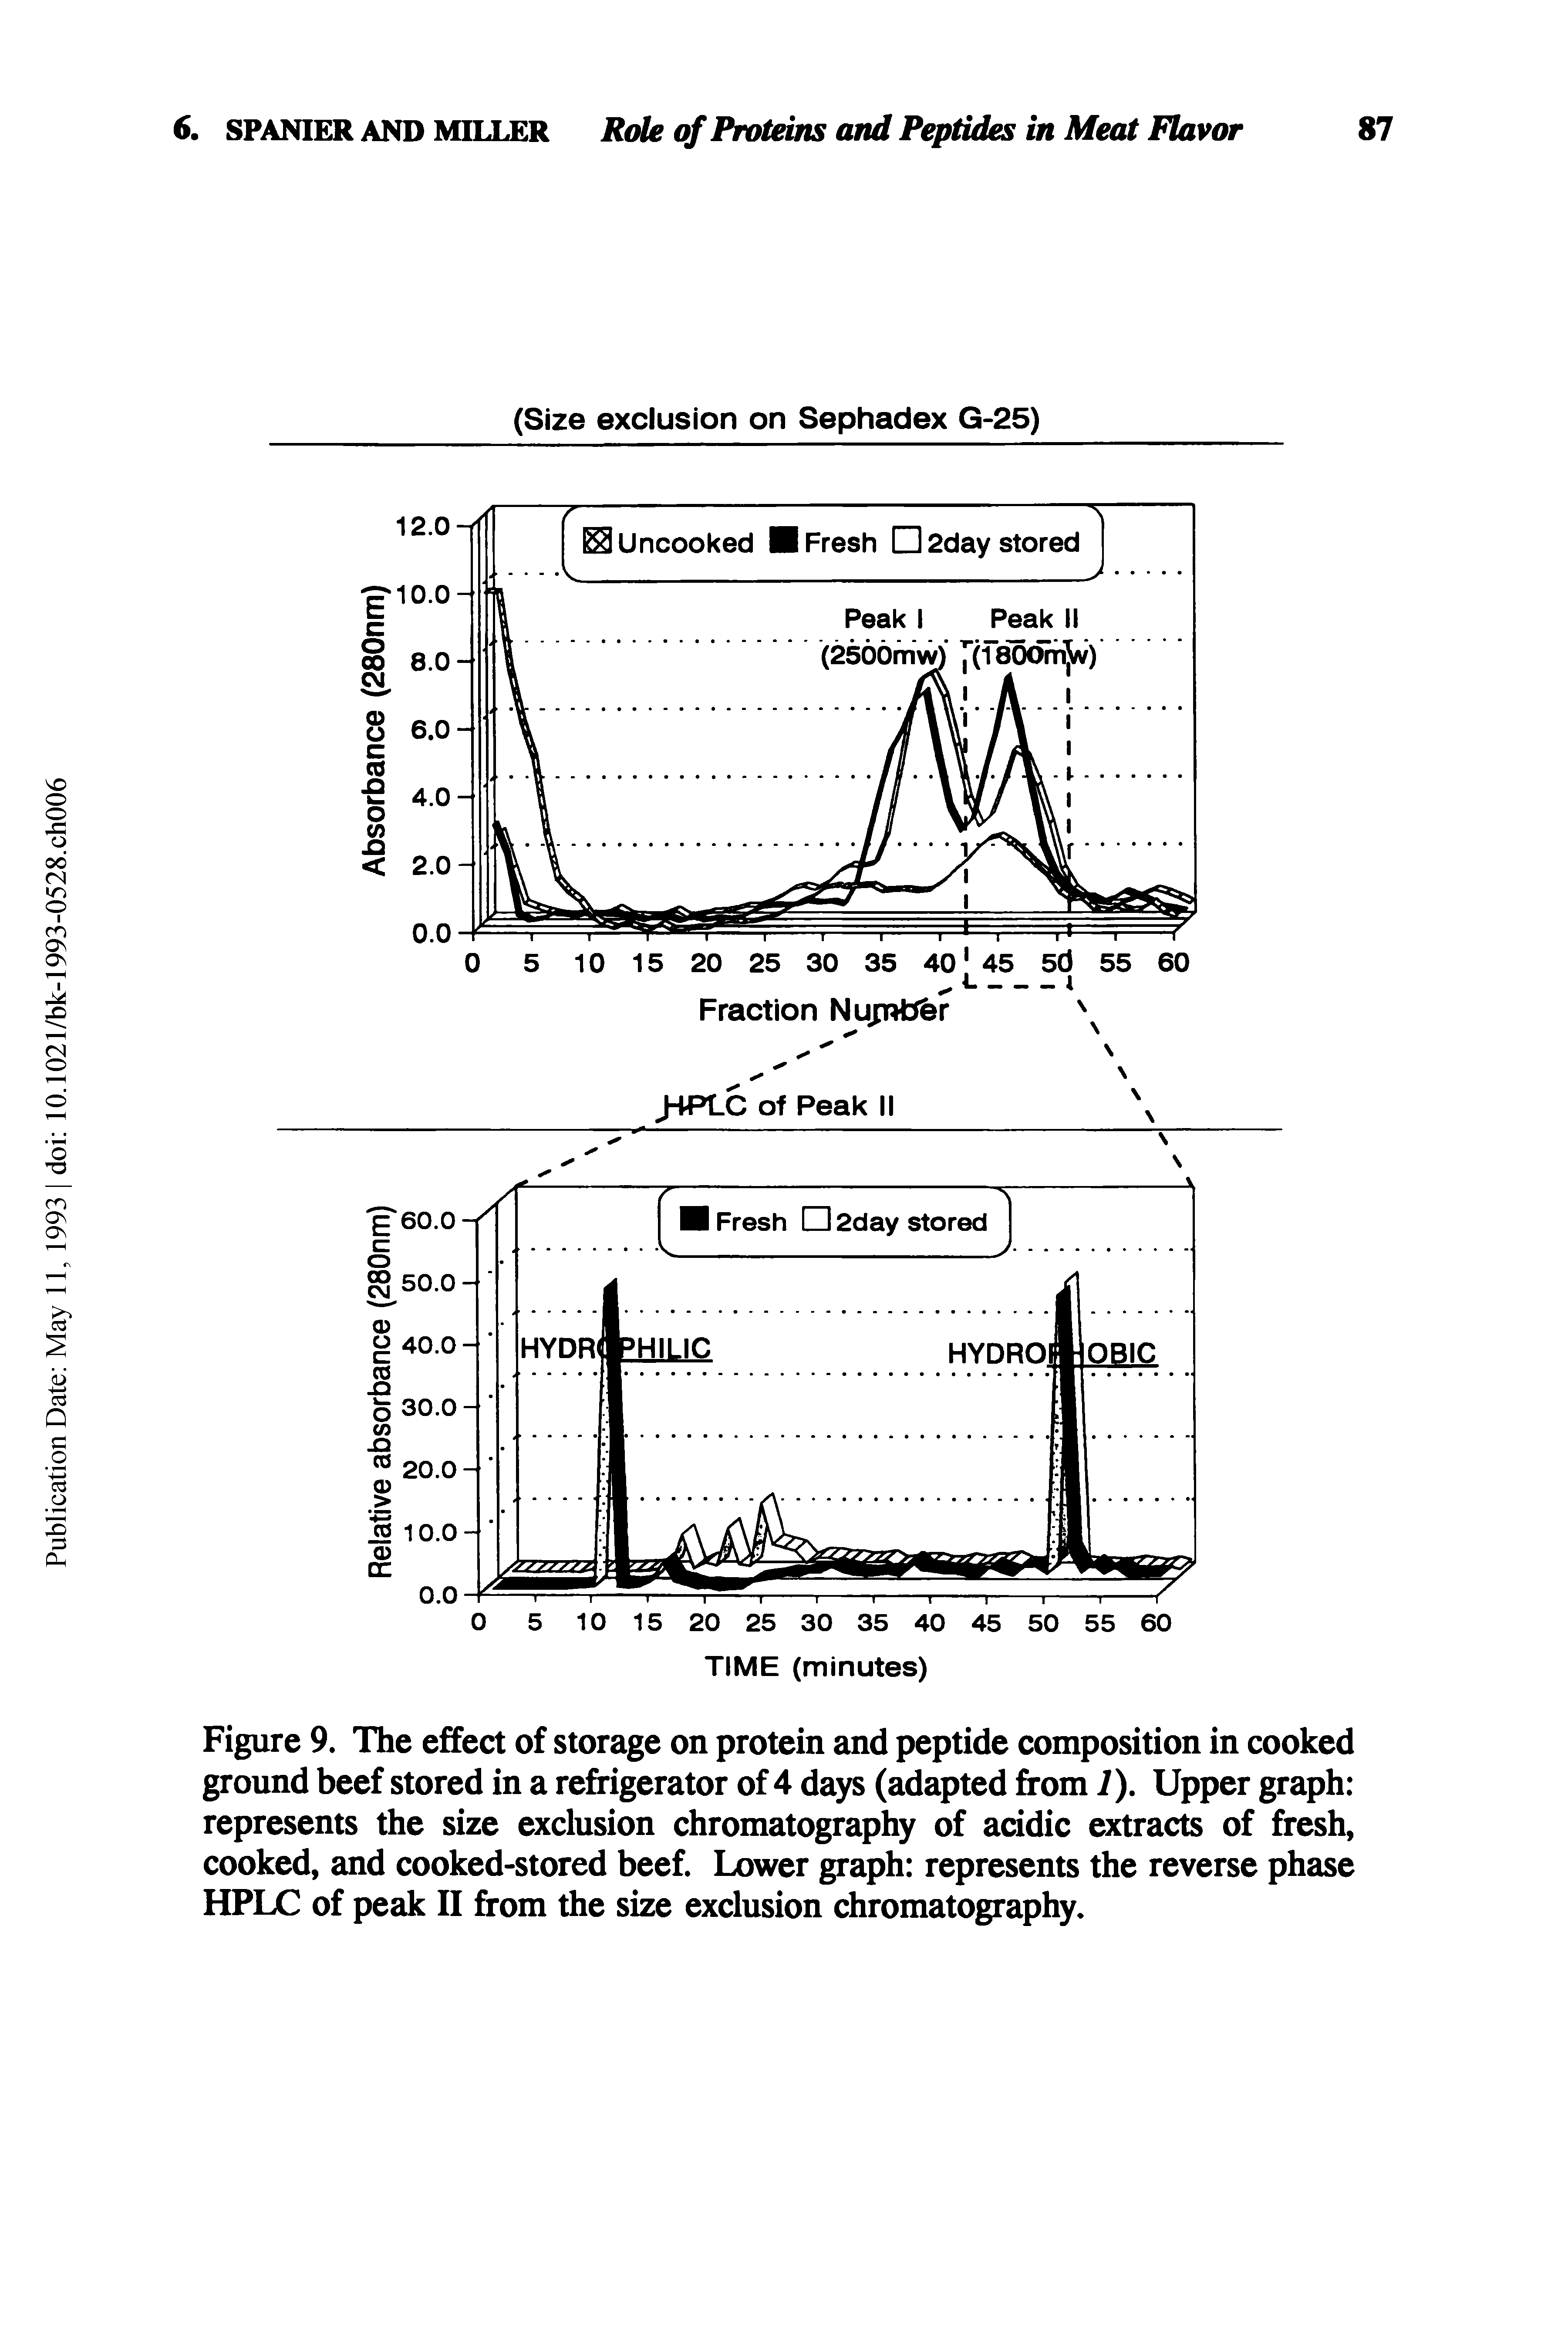 Figure 9. The effect of storage on protein and peptide composition in cooked ground beef stored in a refrigerator of 4 days (adapted from 7). Upper graph represents the size exclusion chromatography of acidic extracts of fresh, cooked, and cooked-stored beef. Lx)wer graph represents the reverse phase HPLC of peak II from the size exclusion chromatography.